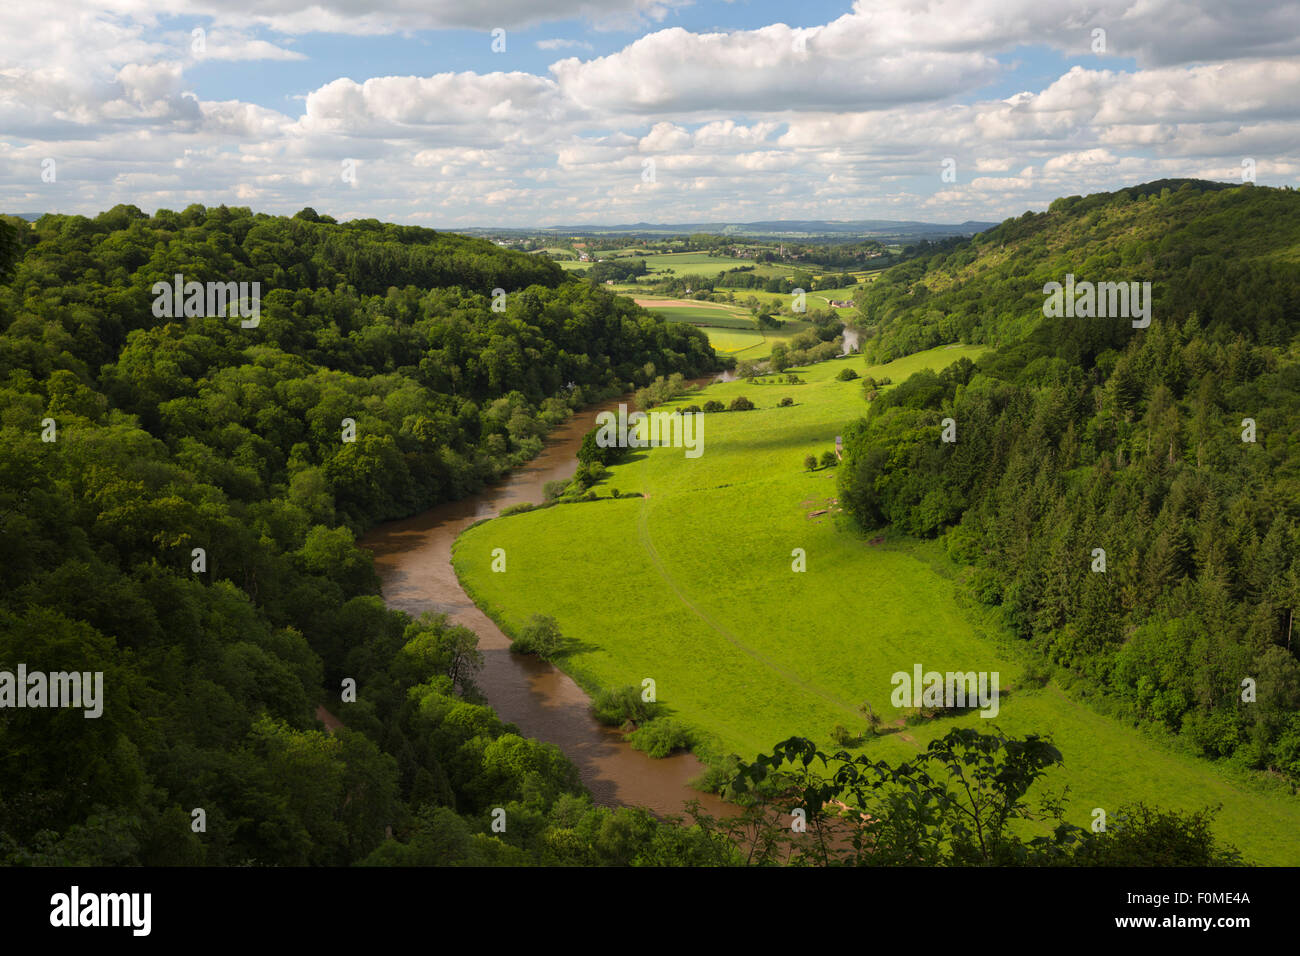 View over Wye Valley from Symonds Yat Rock, Symonds Yat, Forest of Dean, Herefordshire, England, United Kingdom, Europe Stock Photo